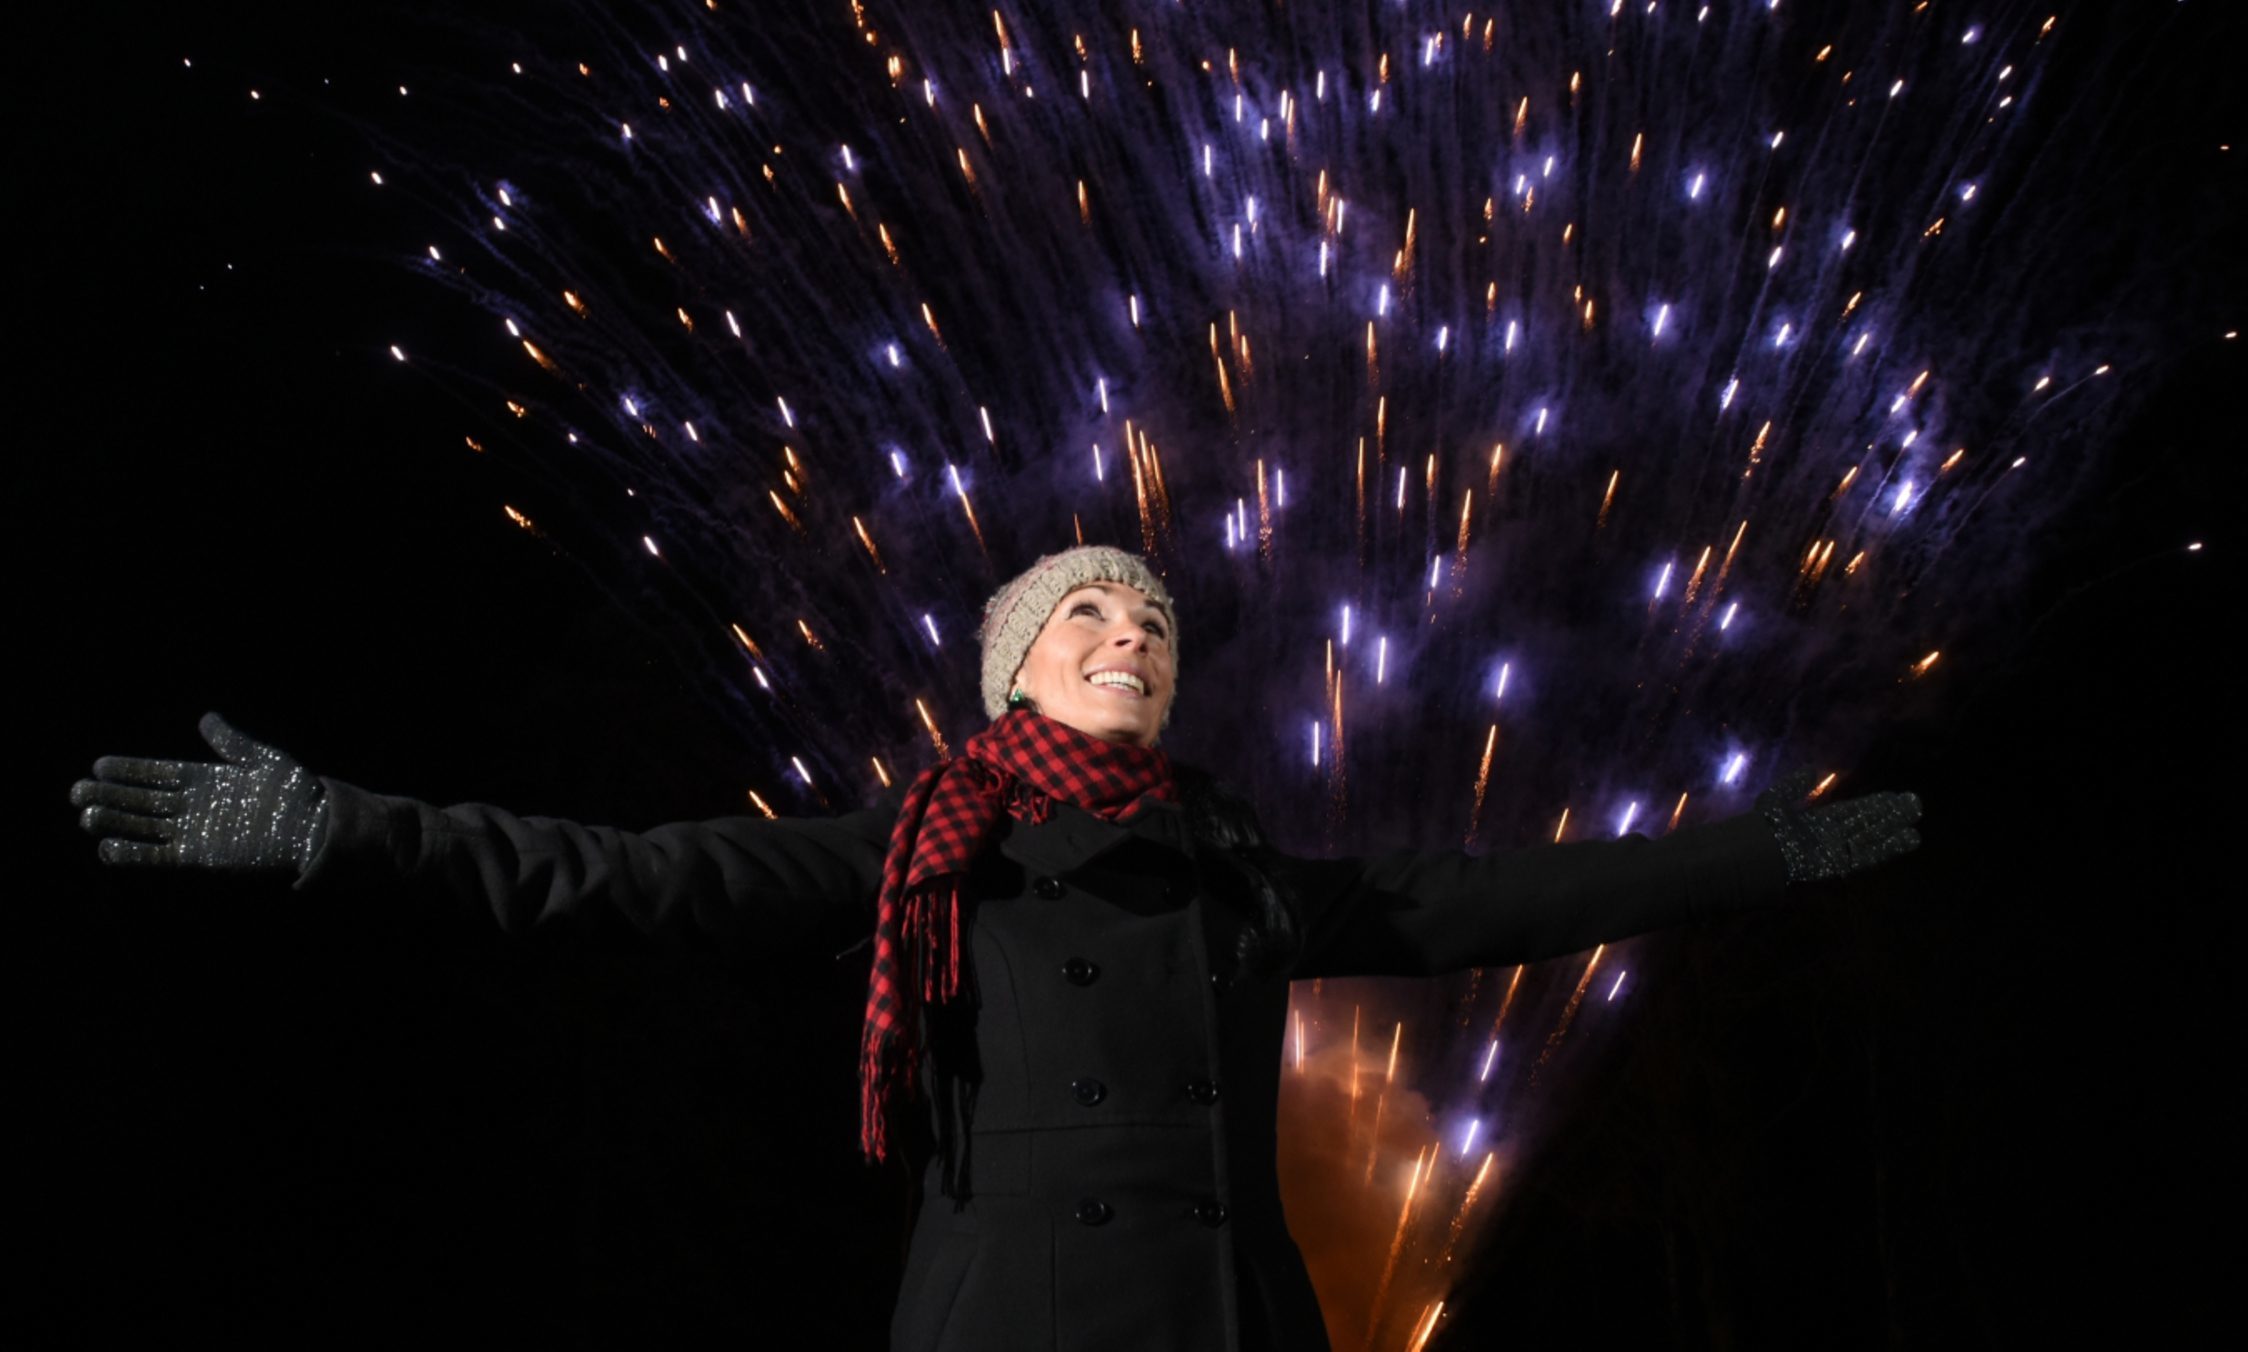 Boom! Bang! The Courier's Gayle Ritchie was treated to a very special fireworks display by Blast Design.